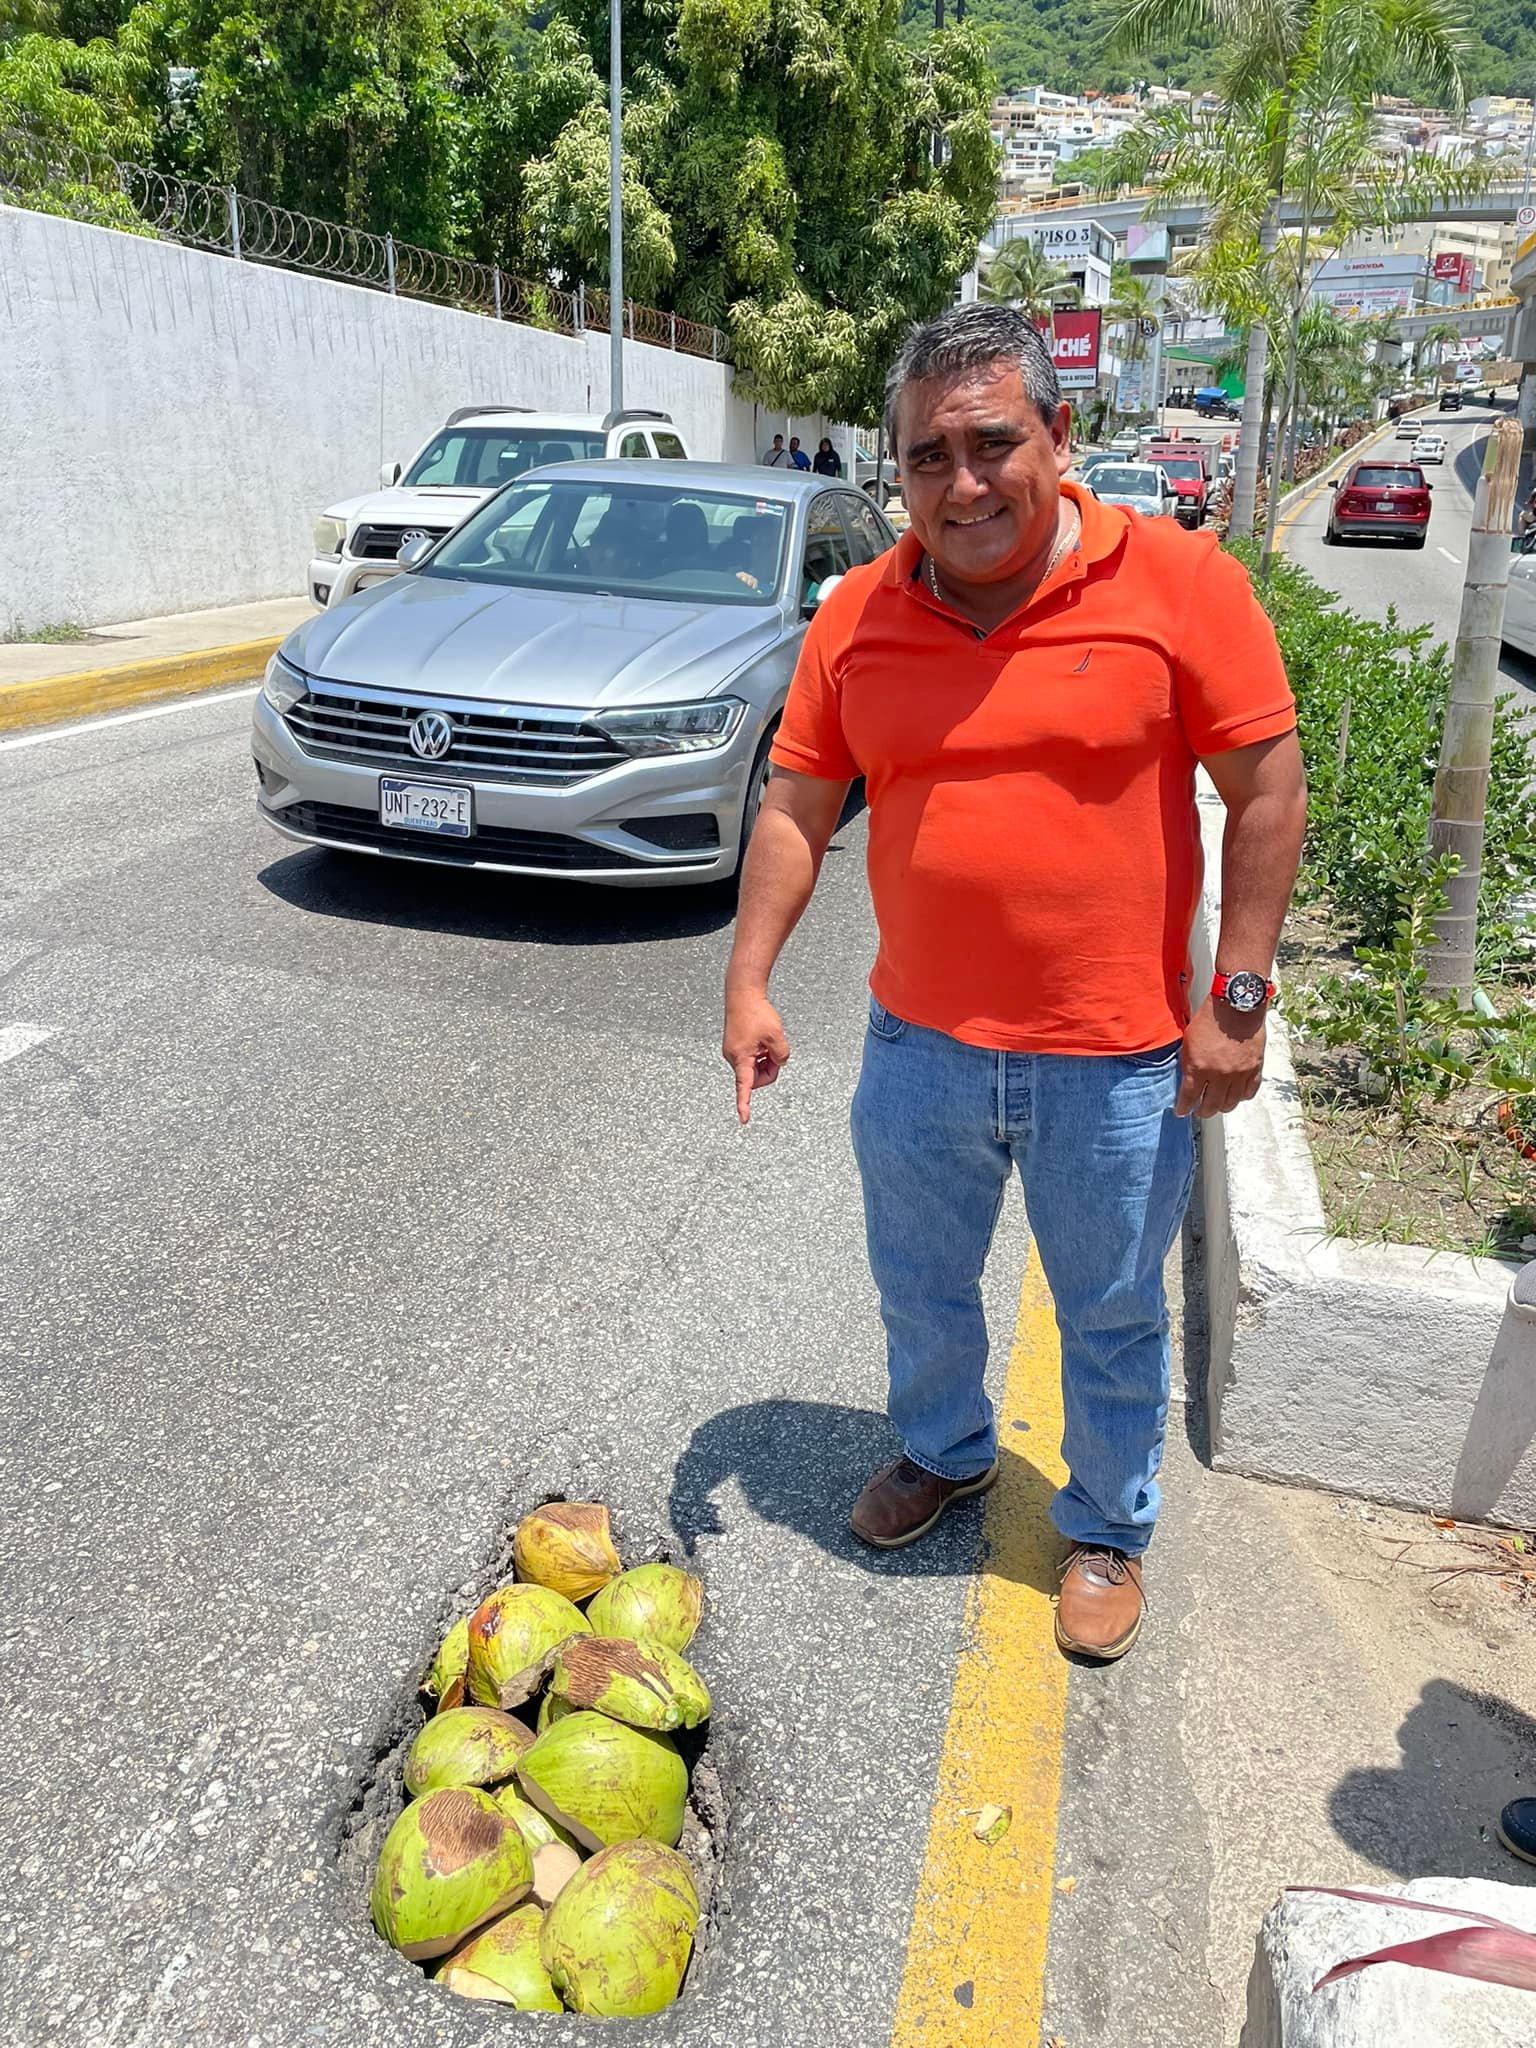 Mexican politician fills potholes with coconut husks to protest government inaction | weirdkaya